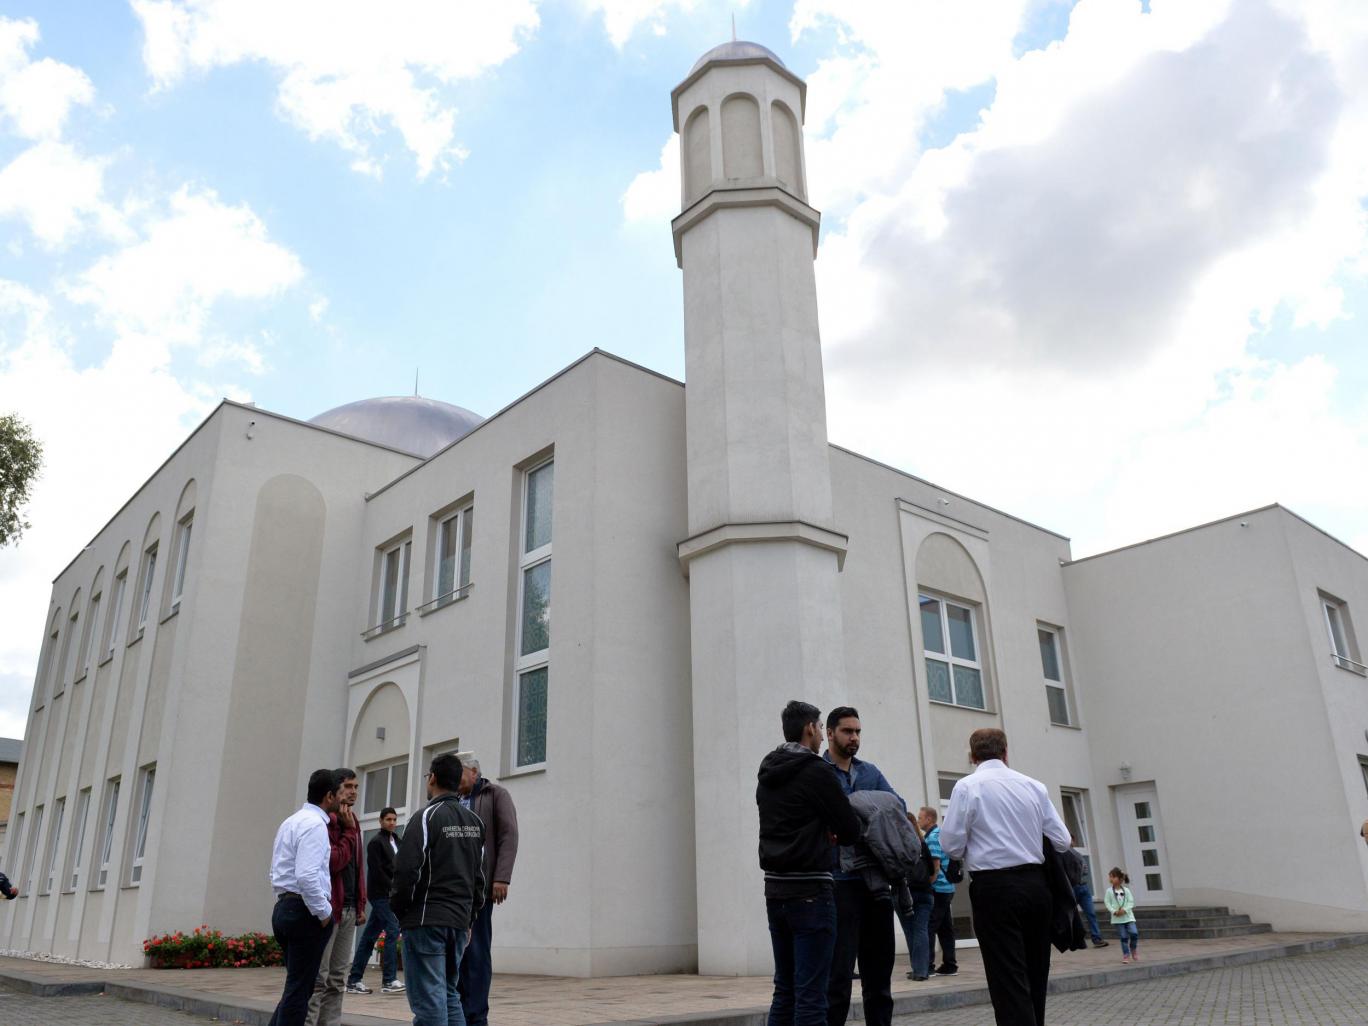 People stand in front of the Khadija mosque in Berlin Getty
